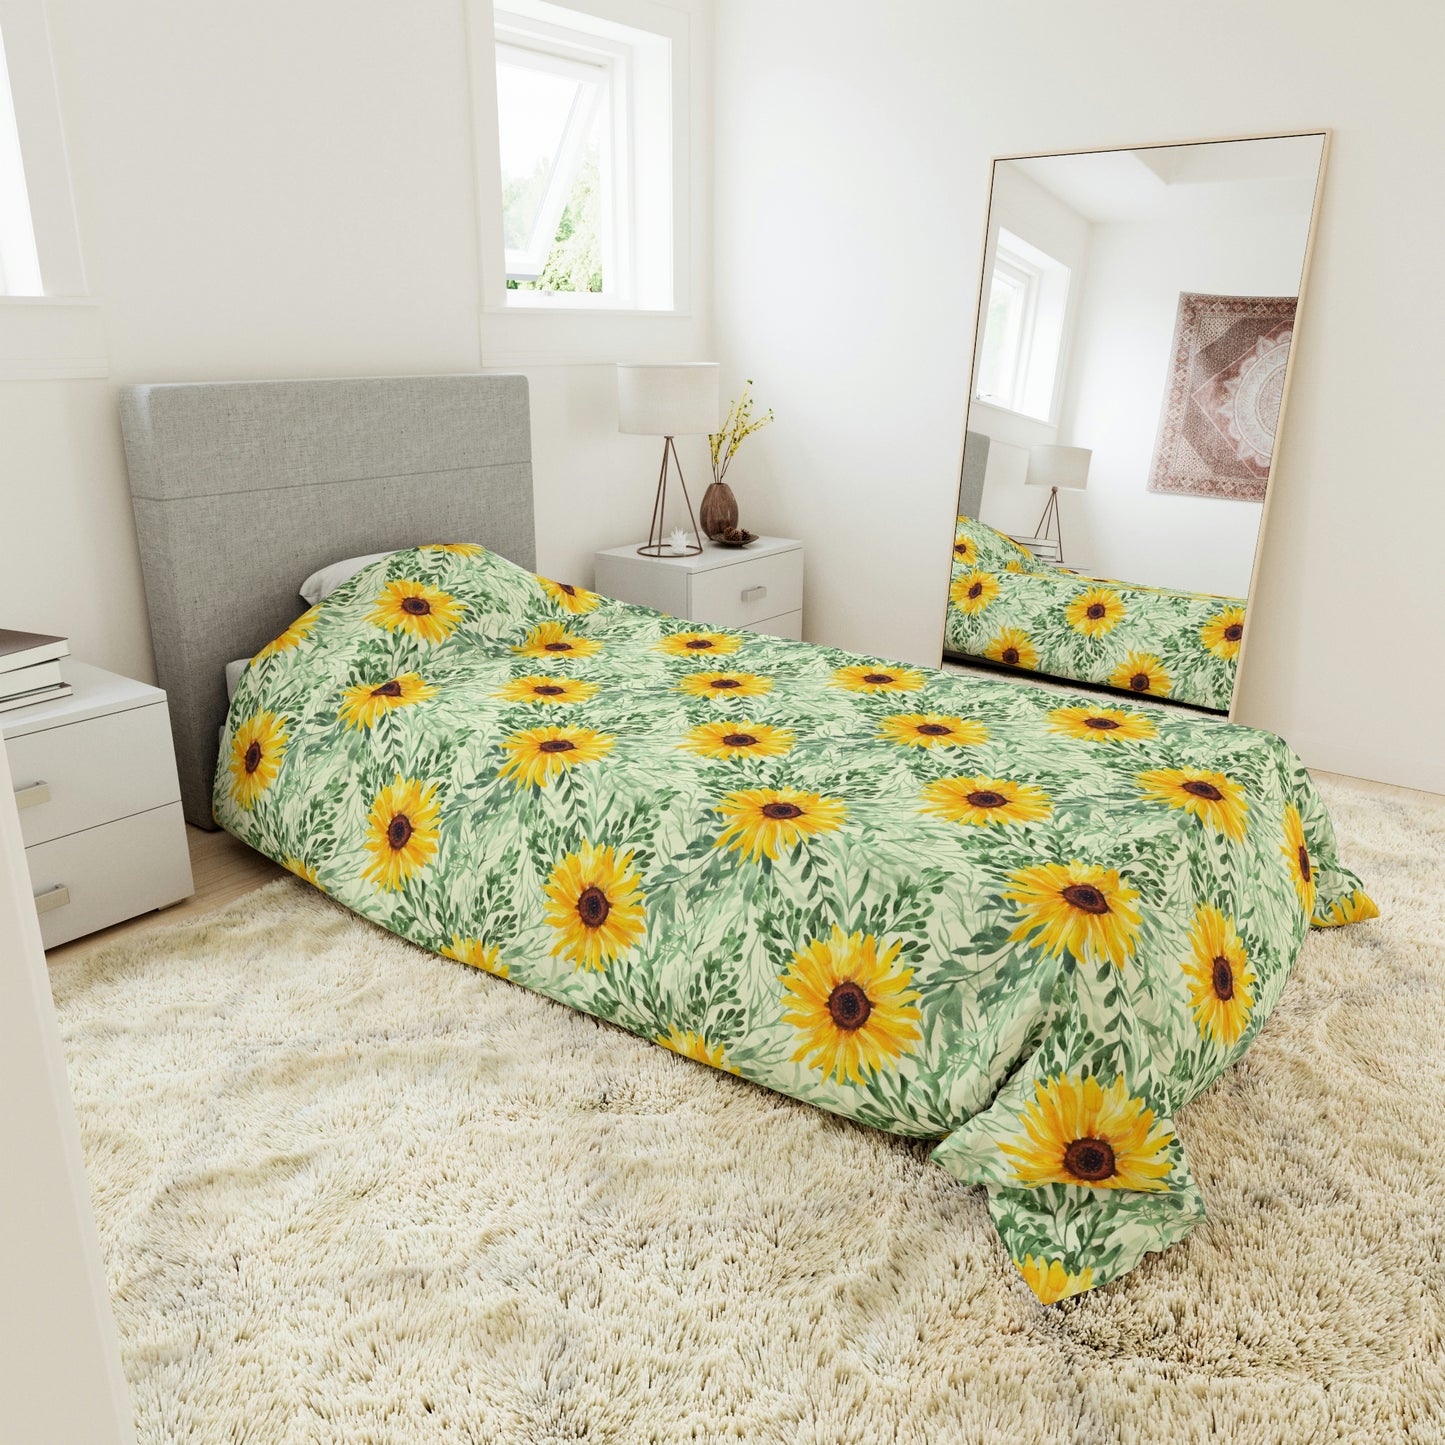 Green & Yellow Sunflower Floral Pattern Duvet cover lying on a bed, microfiber floral duvet cover bedroom accent